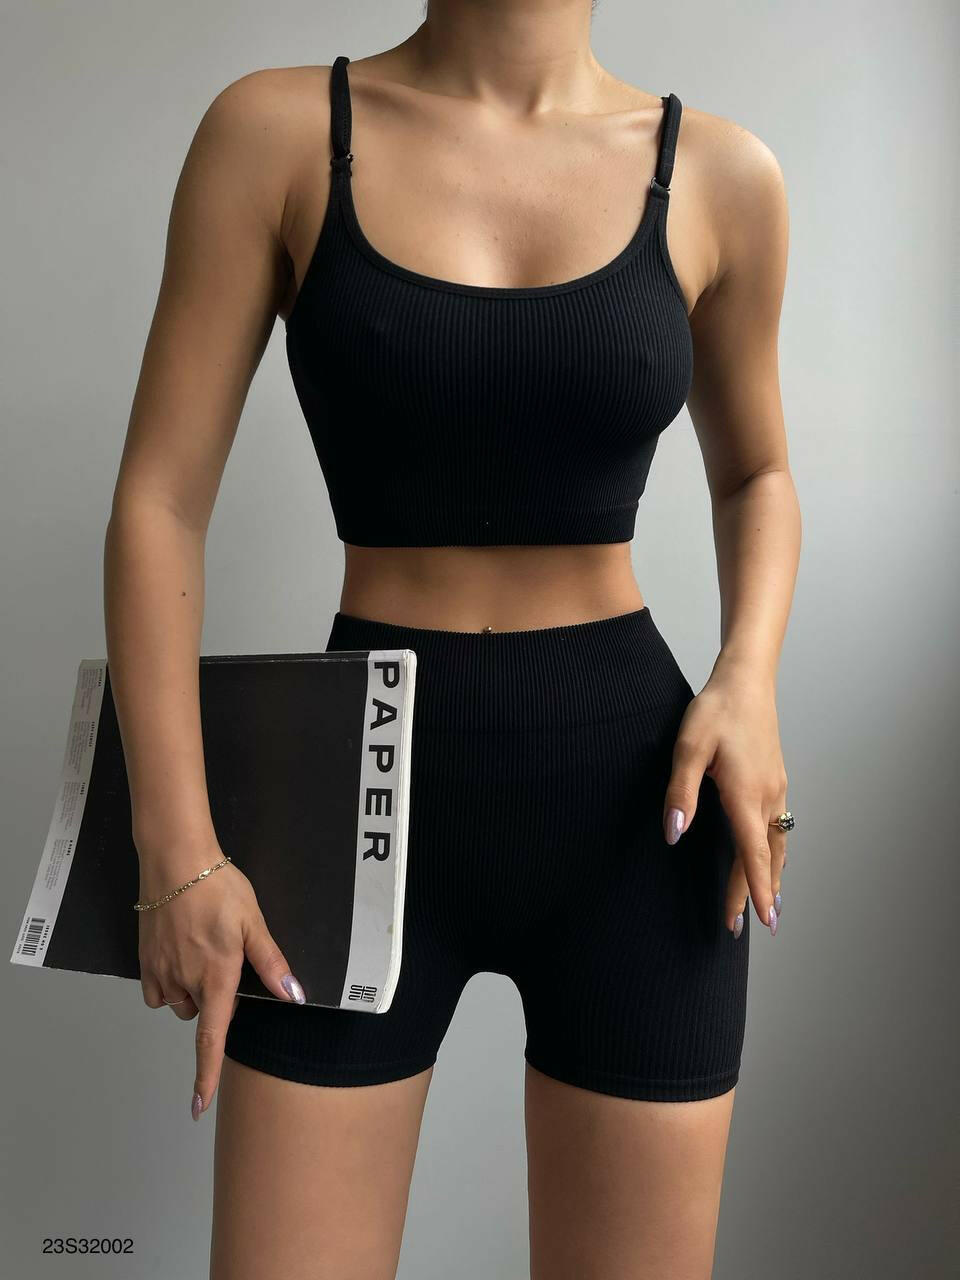 Knit Seamless Bike Shorts and Strappy Sport Bra Workout Set in Black